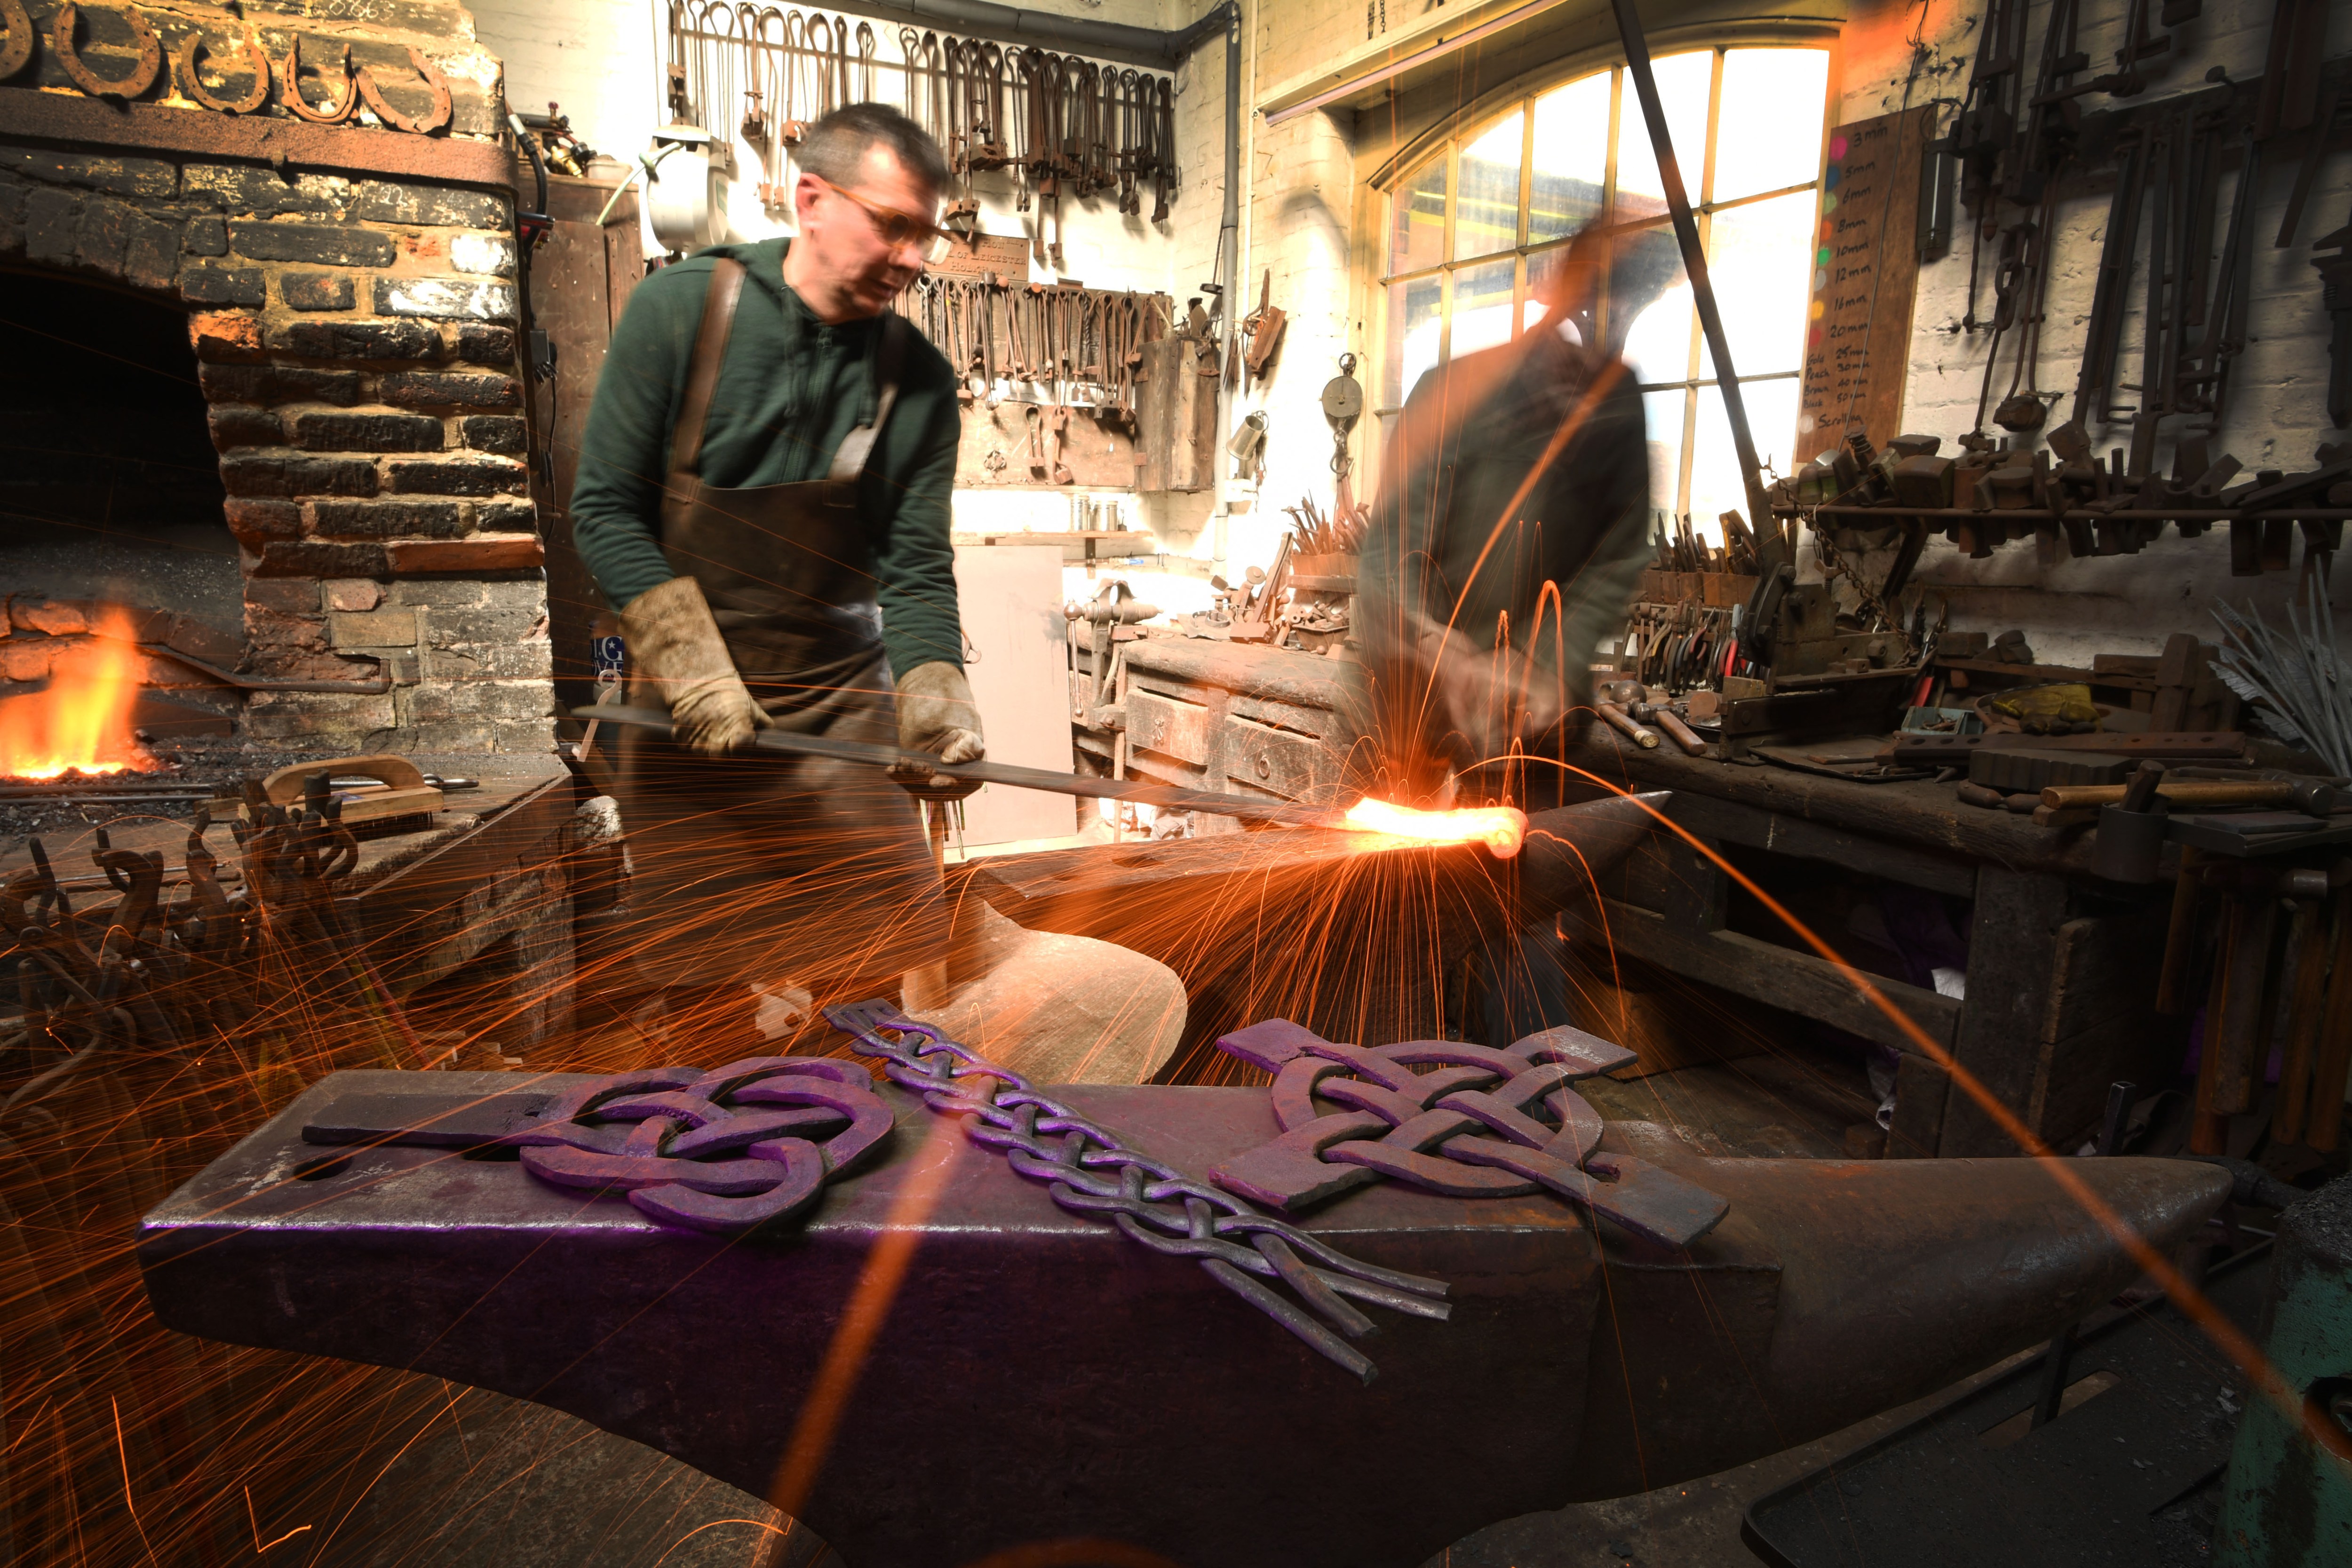 The artist blacksmiths James Spedding and Roger Foyster battle the heat at Holkham forge as they hammer into shape one of over 80 large decorative medieval metal work designs for a commission that will help transform the keep of Norwich Castle into its former glory. As well as crafting decorative door panels, hinges and latches, the pair have also made more than 2,000 traditional fixings, nails and bolts that will bring authenticity to the £15 million Royal Palace Reborn project opening later this year